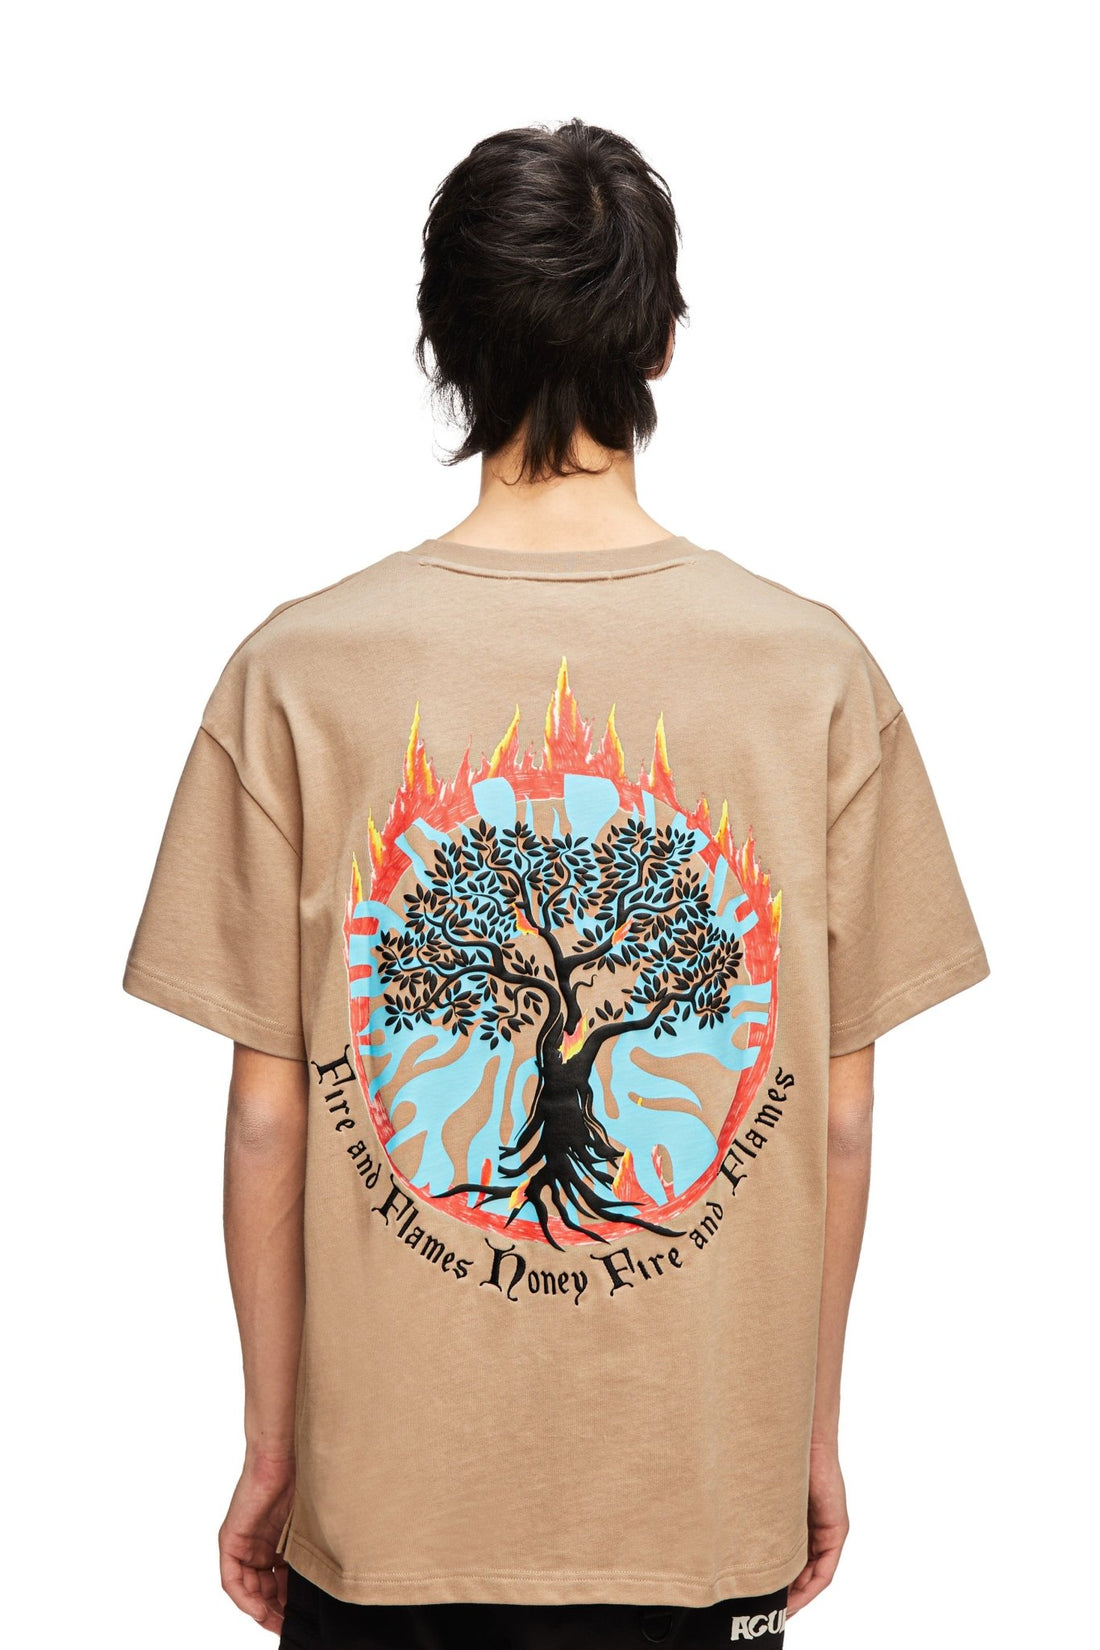 SACRED TREE T-SHIRT Acupuncture